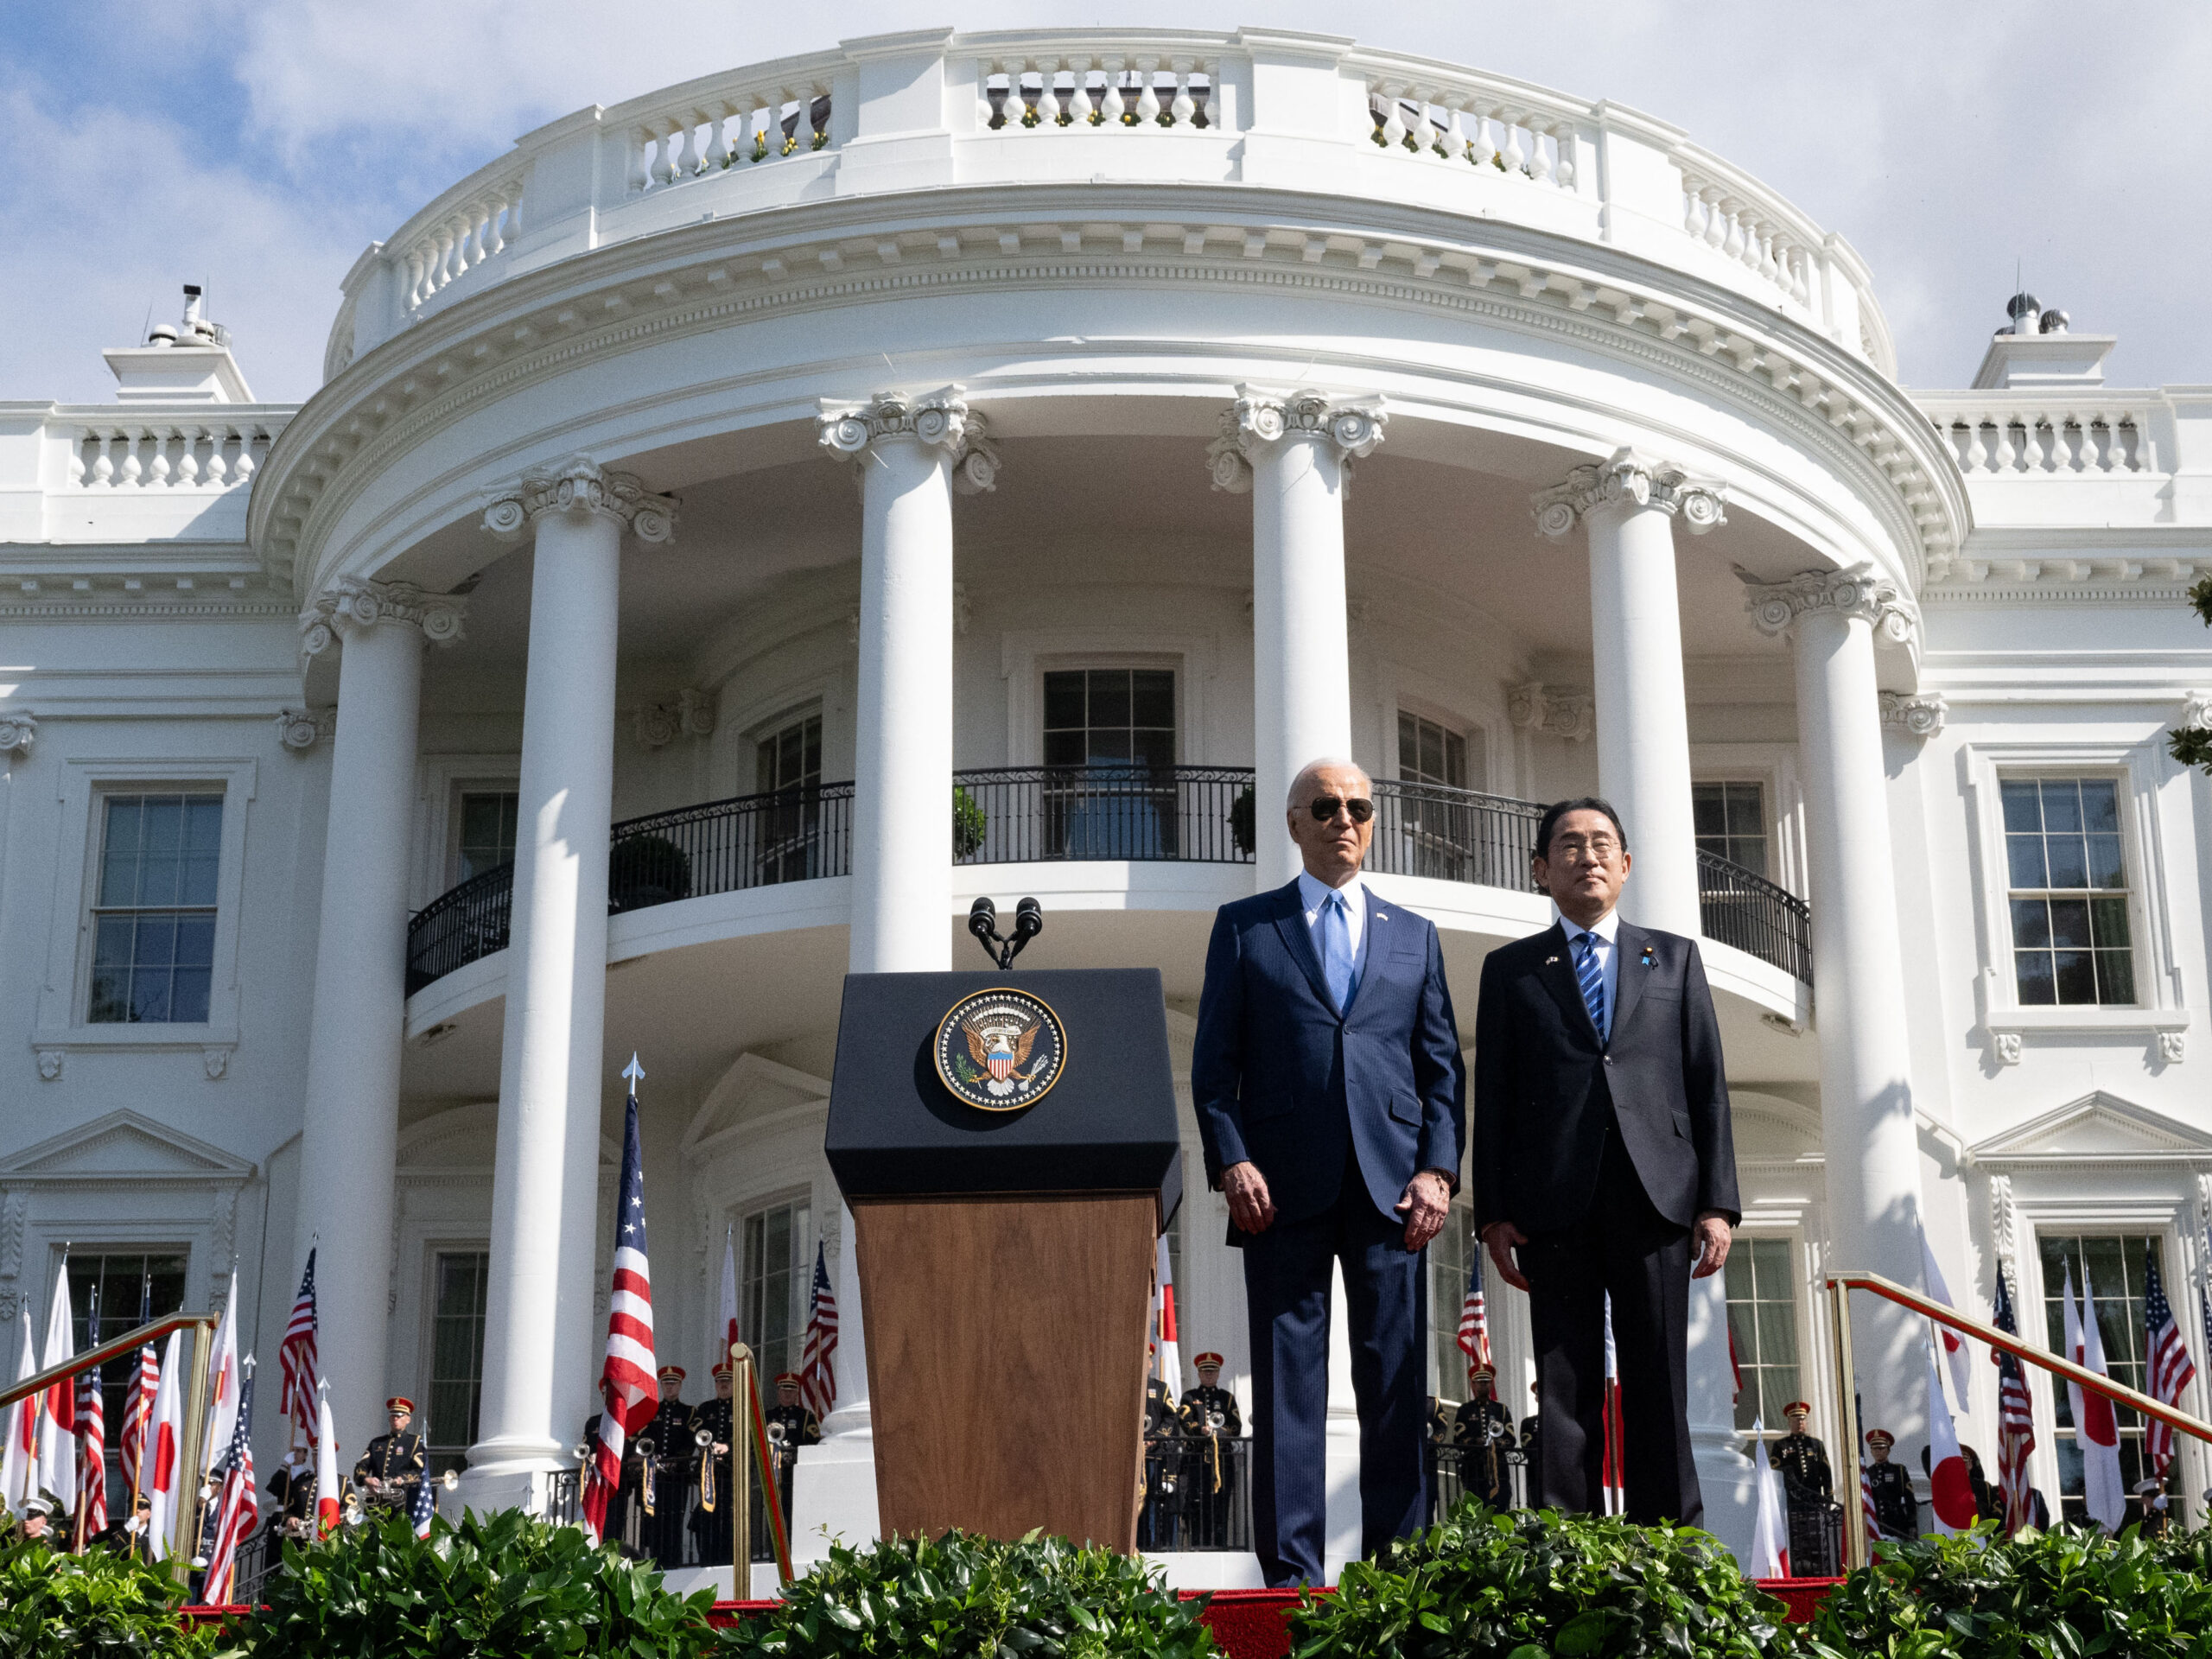 President Biden and Japanese Prime Minister Fumio Kishida stand together during a state visit ceremony at the White House.